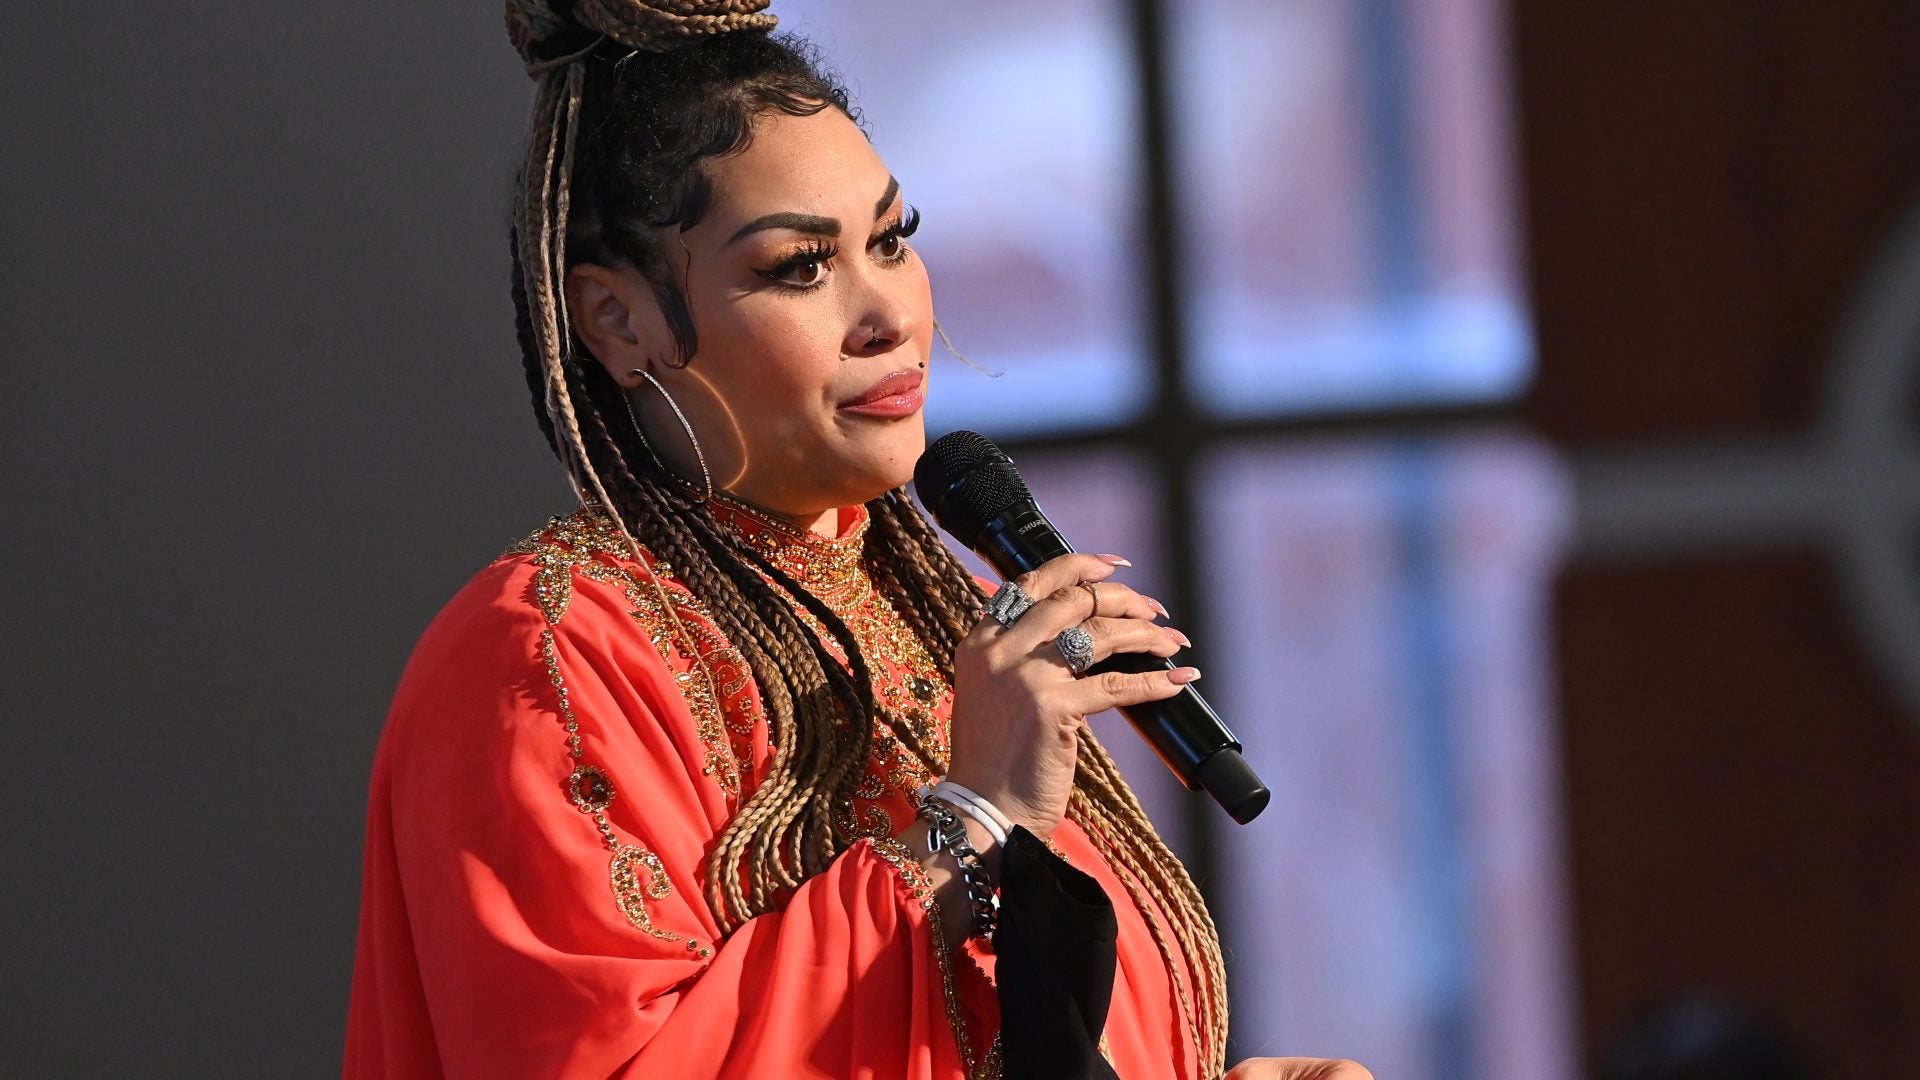 Keke Wyatt's Youngest Son Is Back In The Hospital: 'Is Anyone Else Going Through This?'